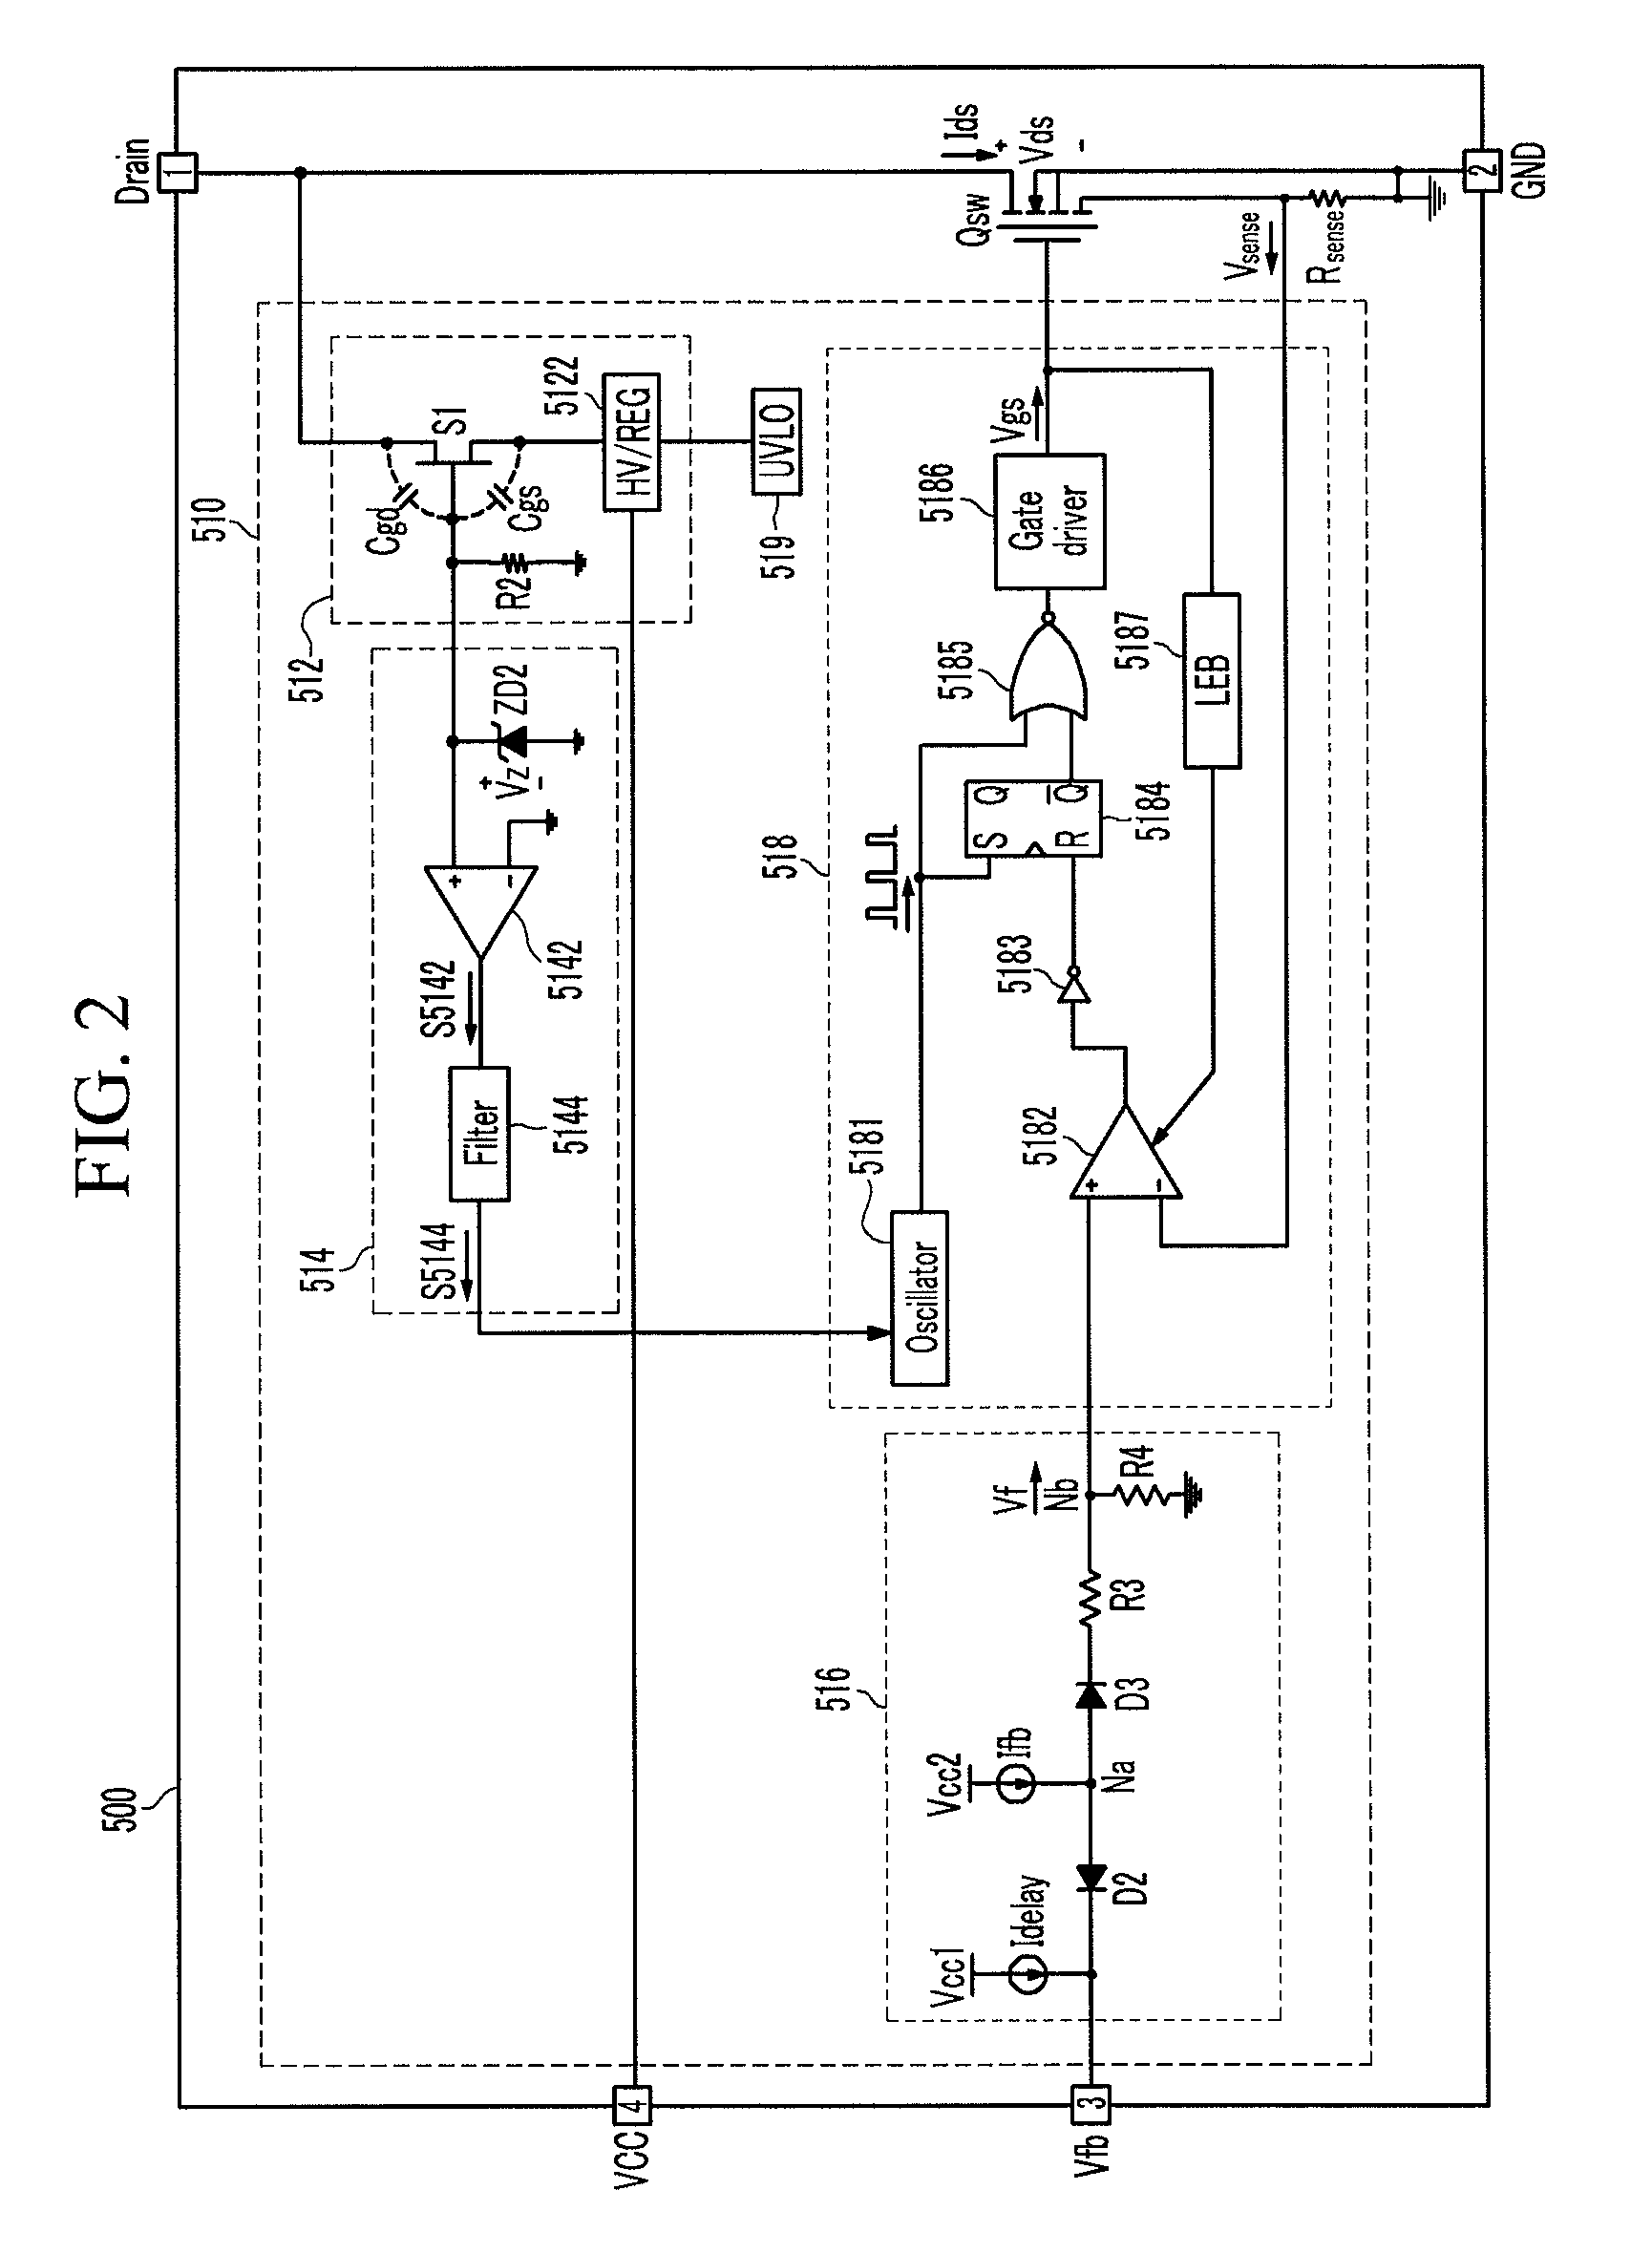 Converter that actuates a switch corresponding to a detected valley of a resonance waveform